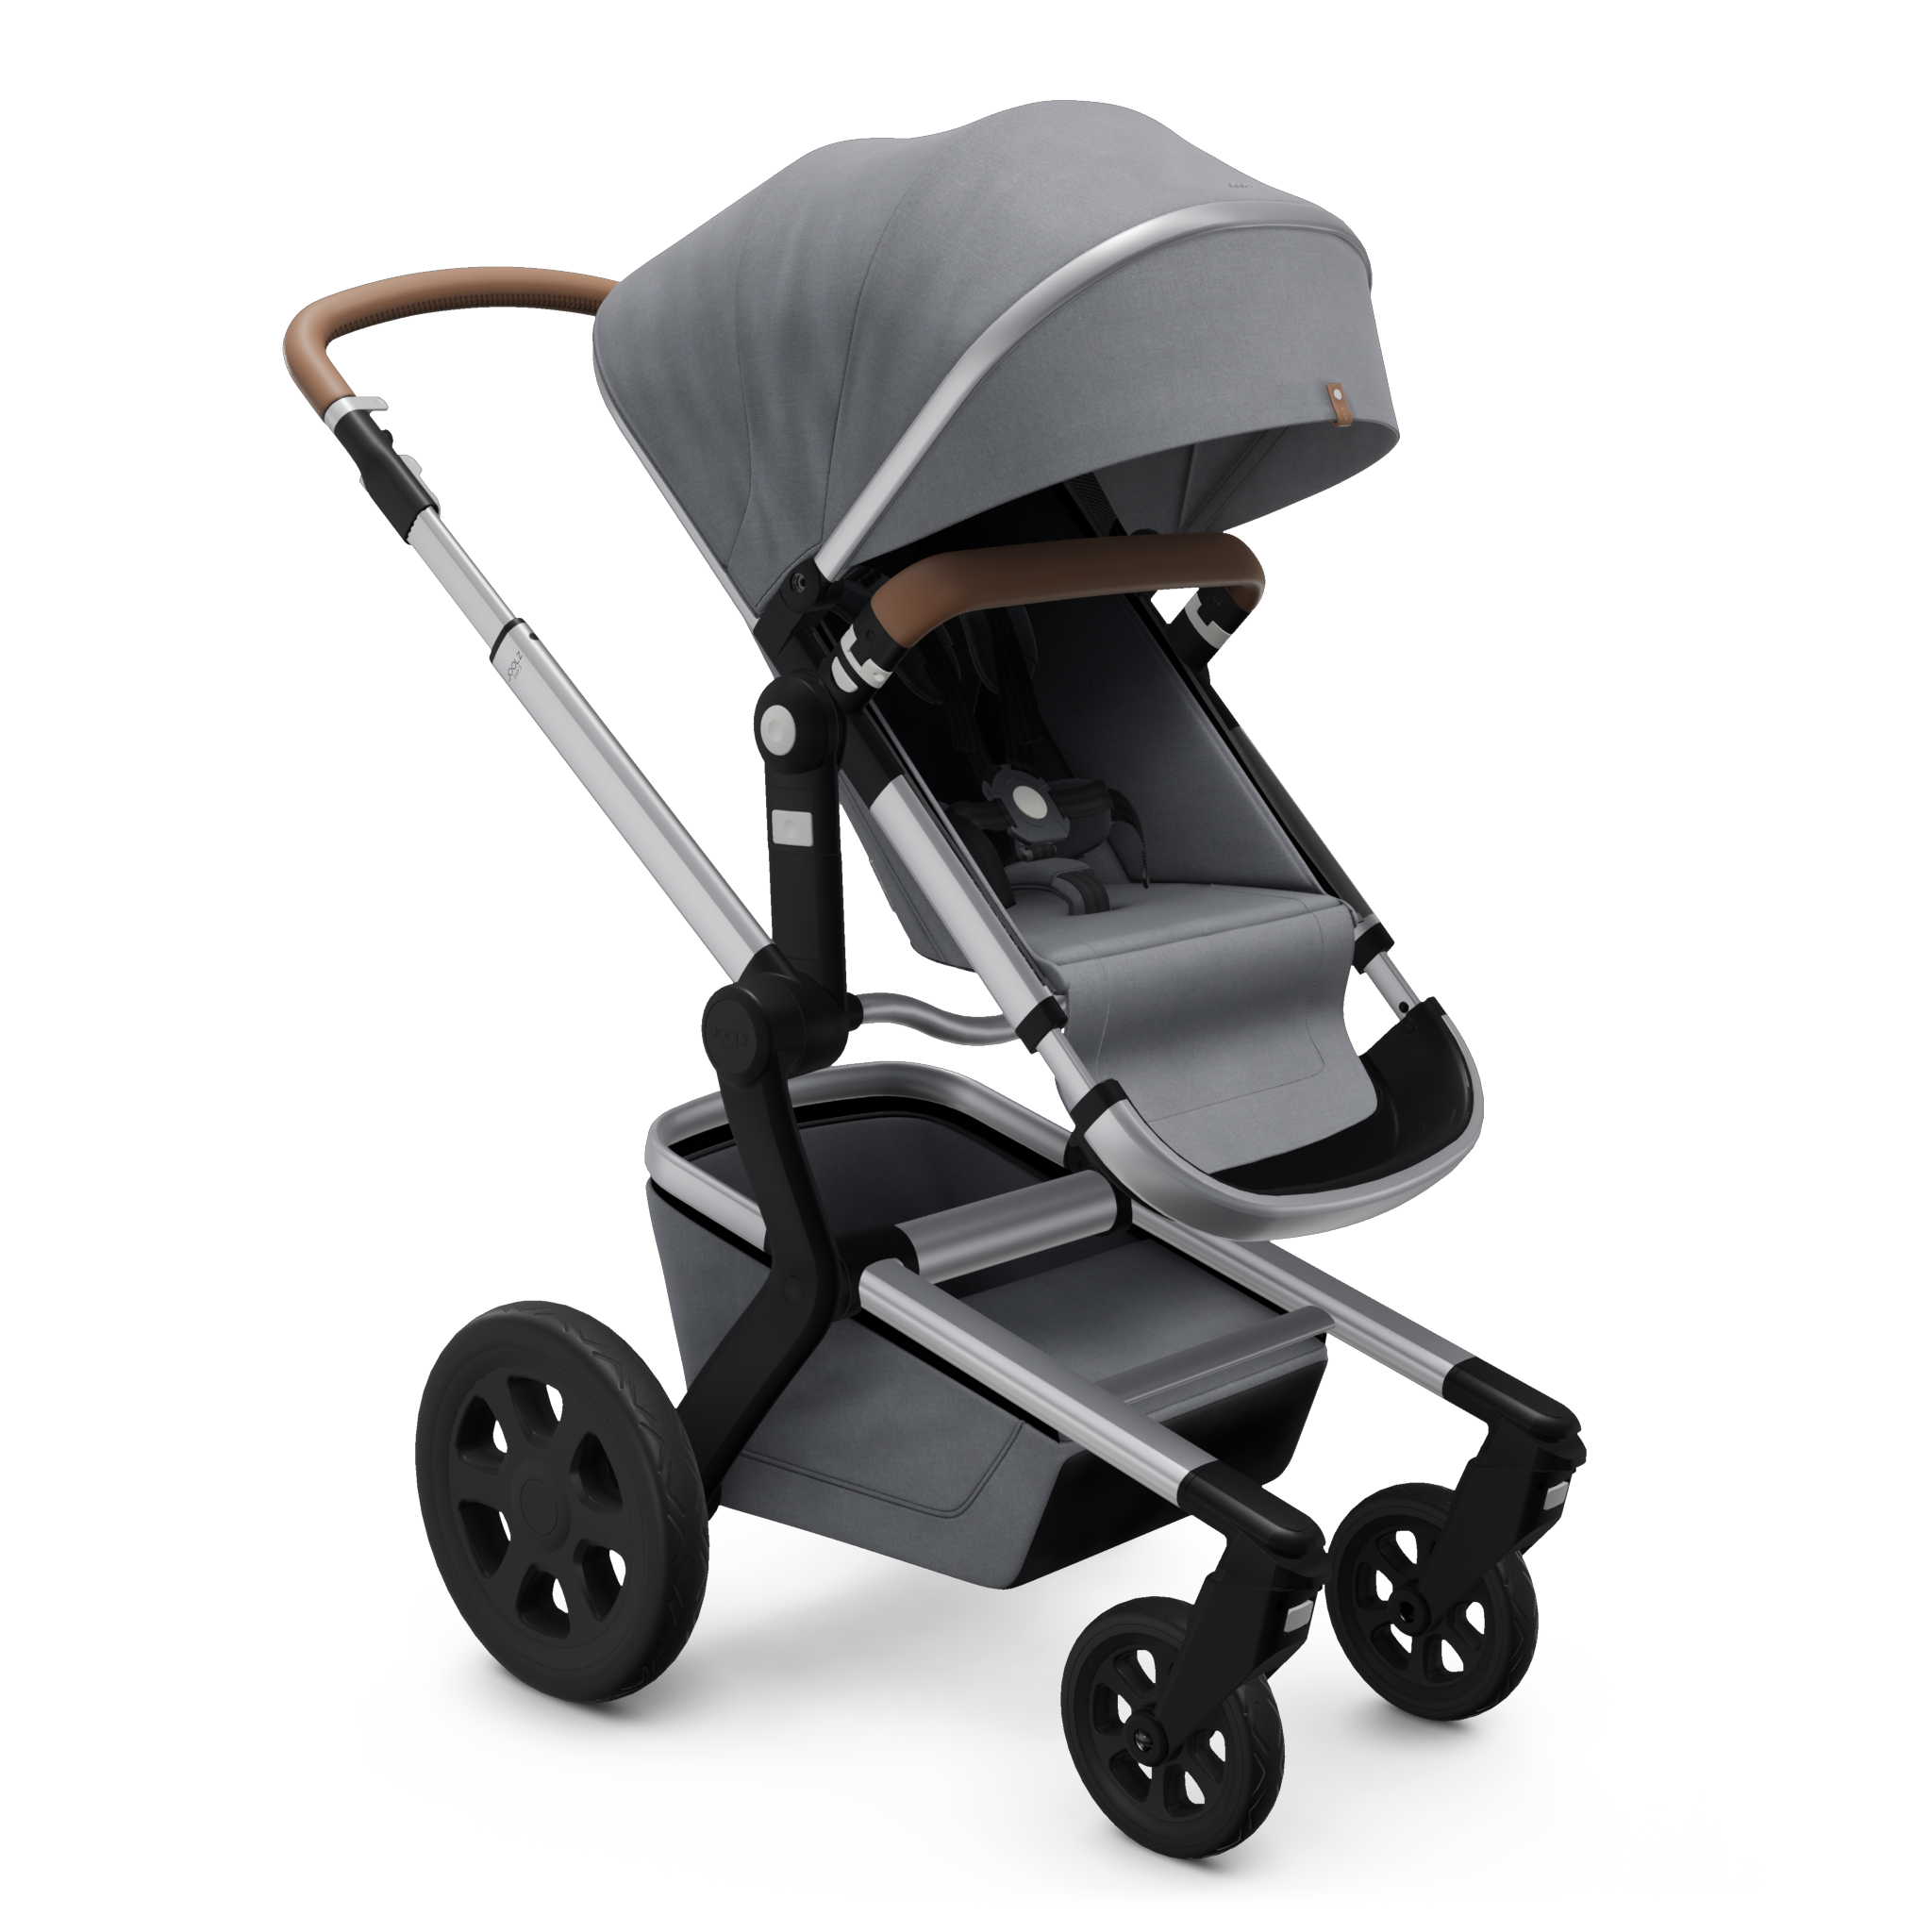 Joolz Day³ pushchair • Joolz official 